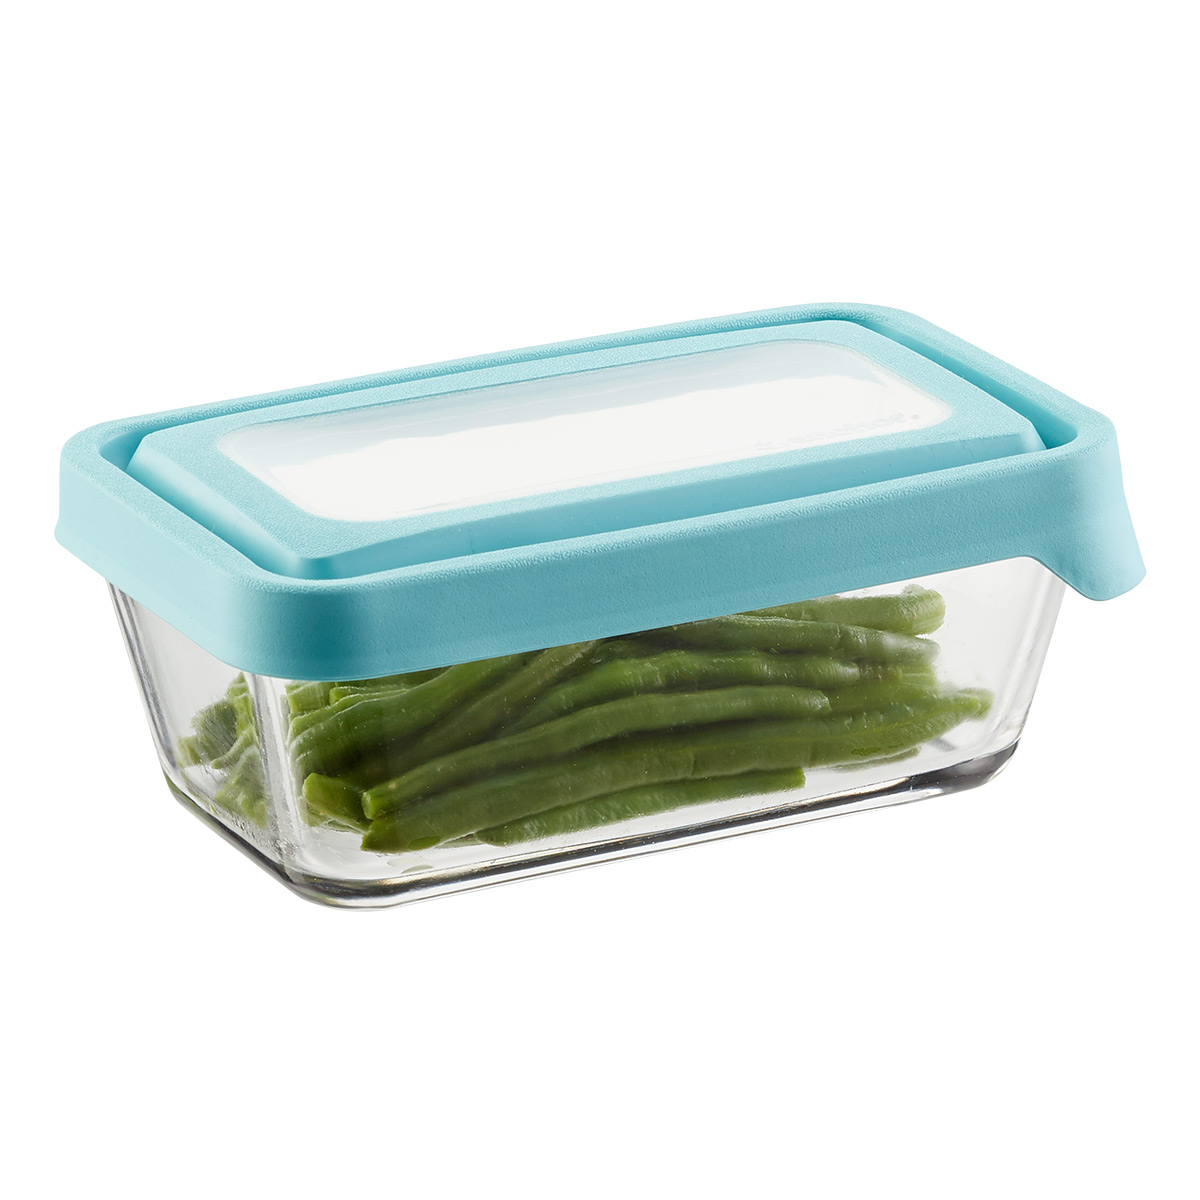 https://www.containerstore.com/catalogimages/351292/10076232-anchor-trueseal-container-r.jpg